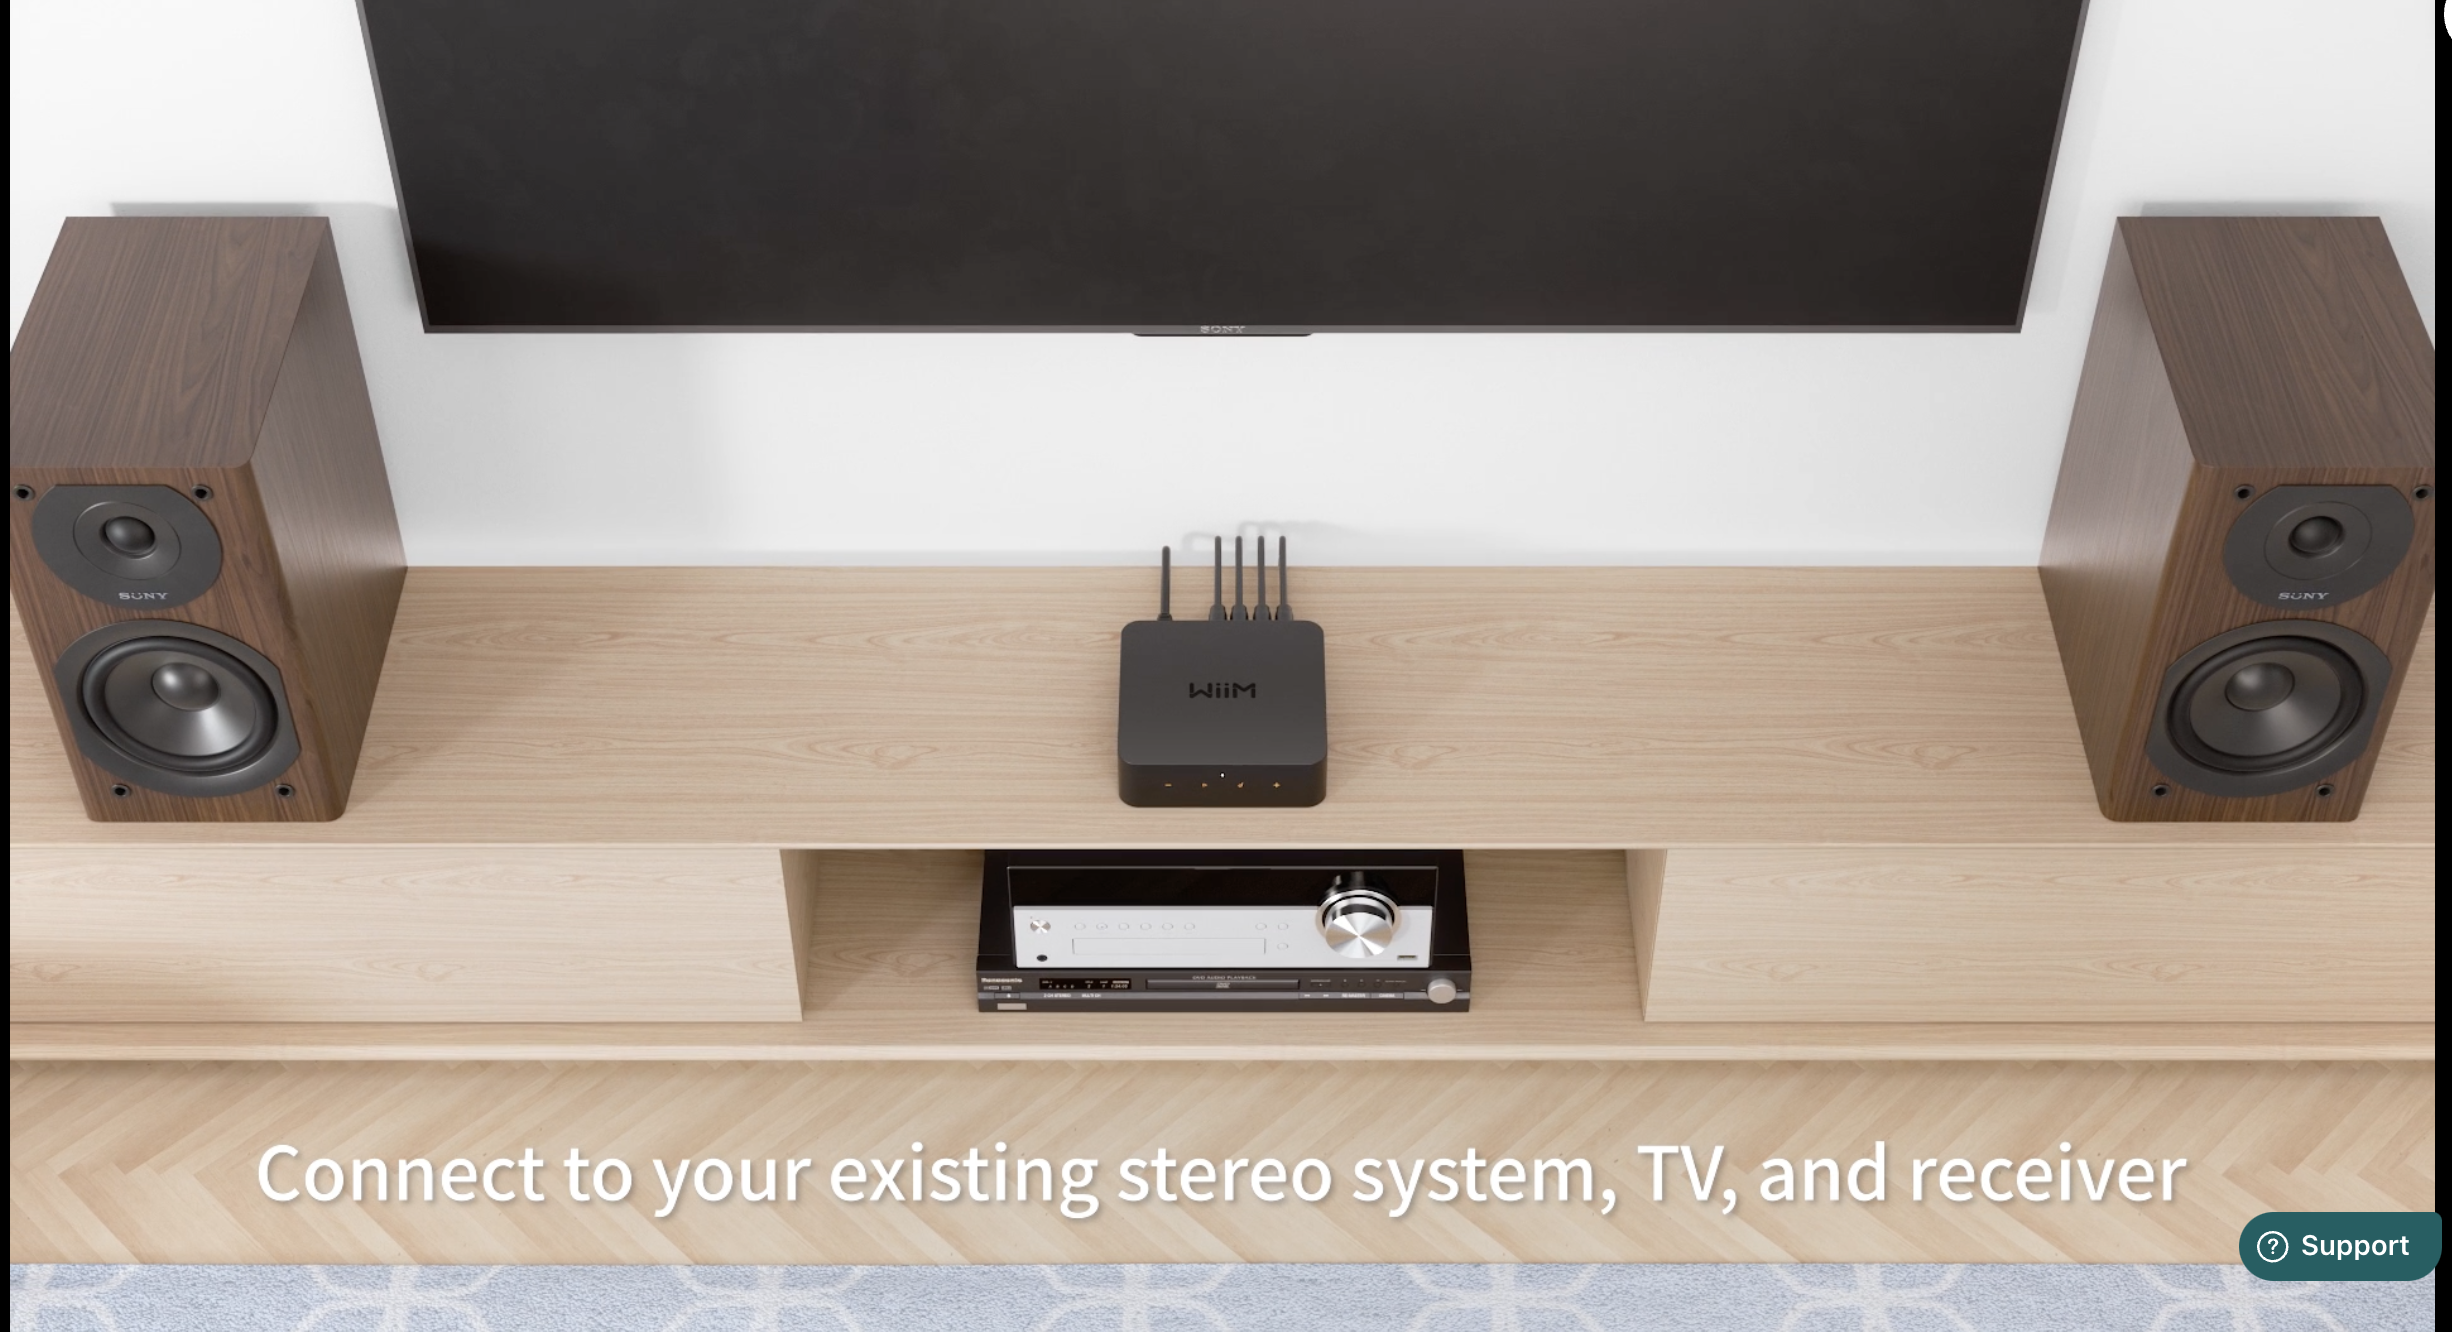 A Modern Micro-System - The WiiM Pro streamer and Ruark MR1 Active